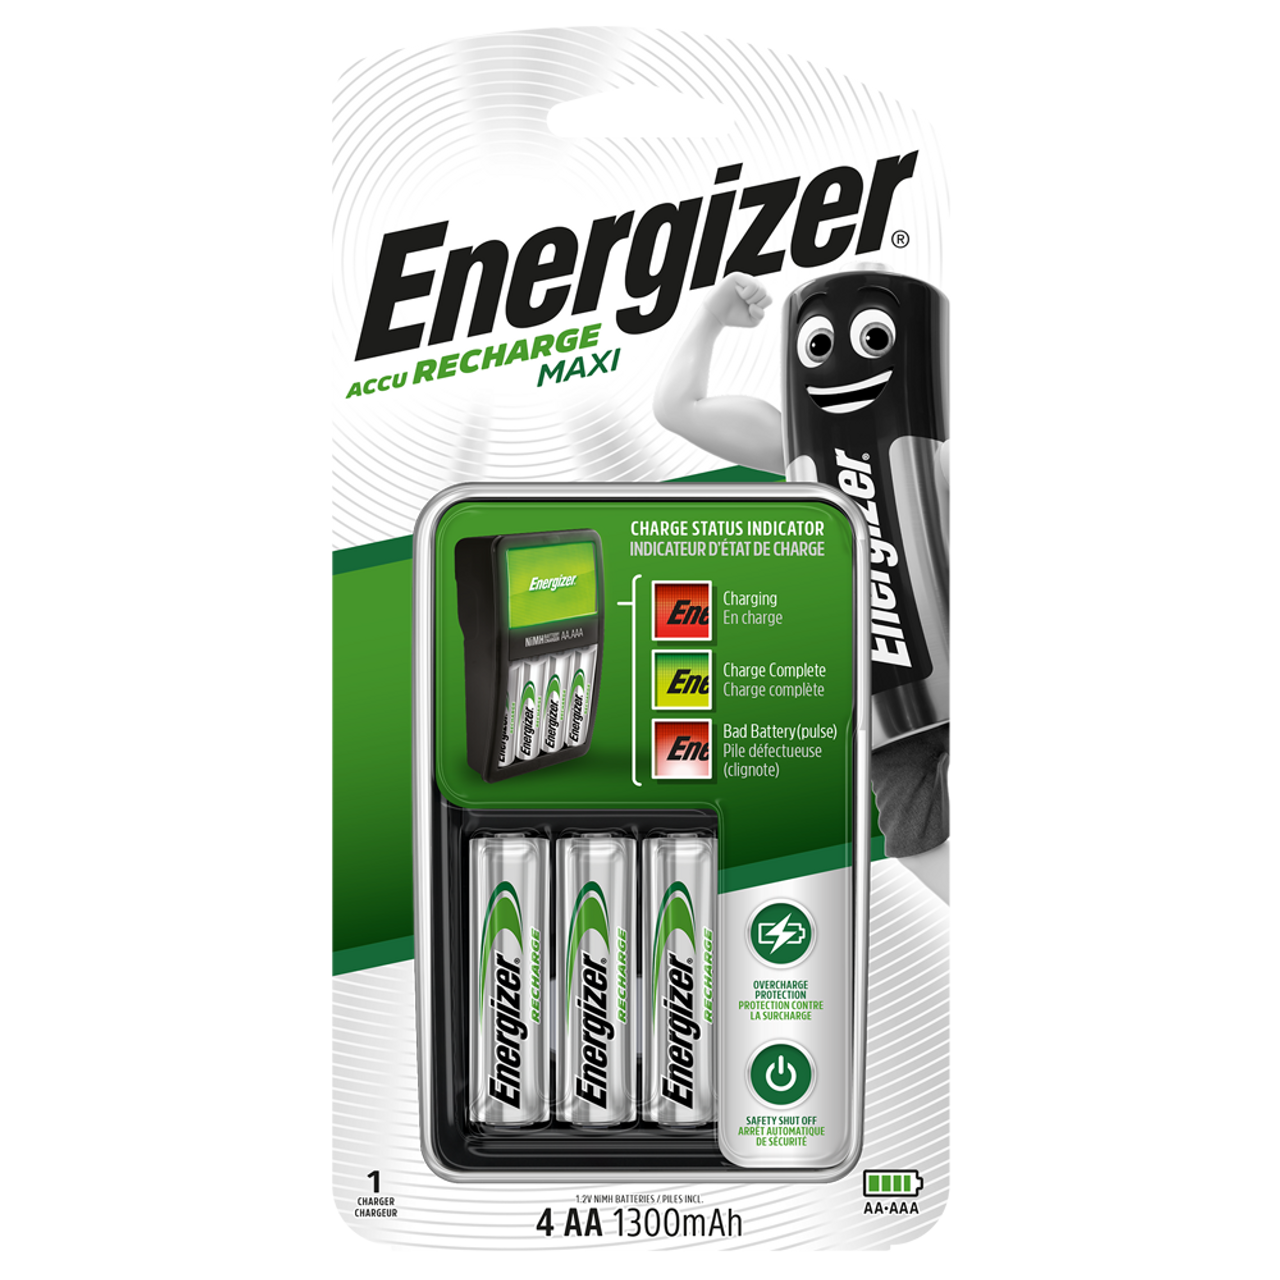 Energizer Maxi Charger with 4 x AA 2000mAh Rechargeable Batteries